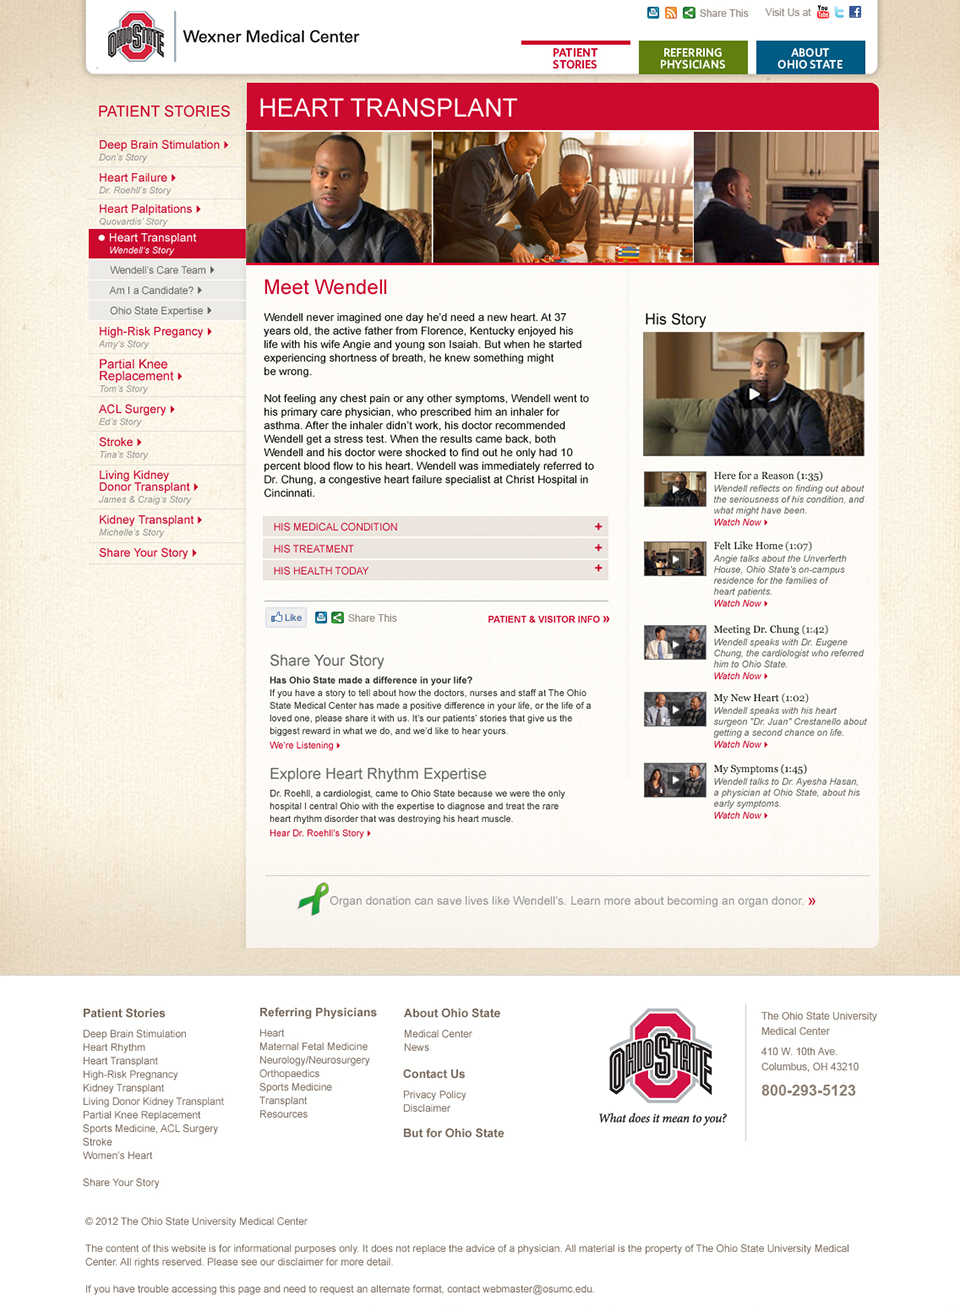 Only Ohio State | Website – Meet Wendell